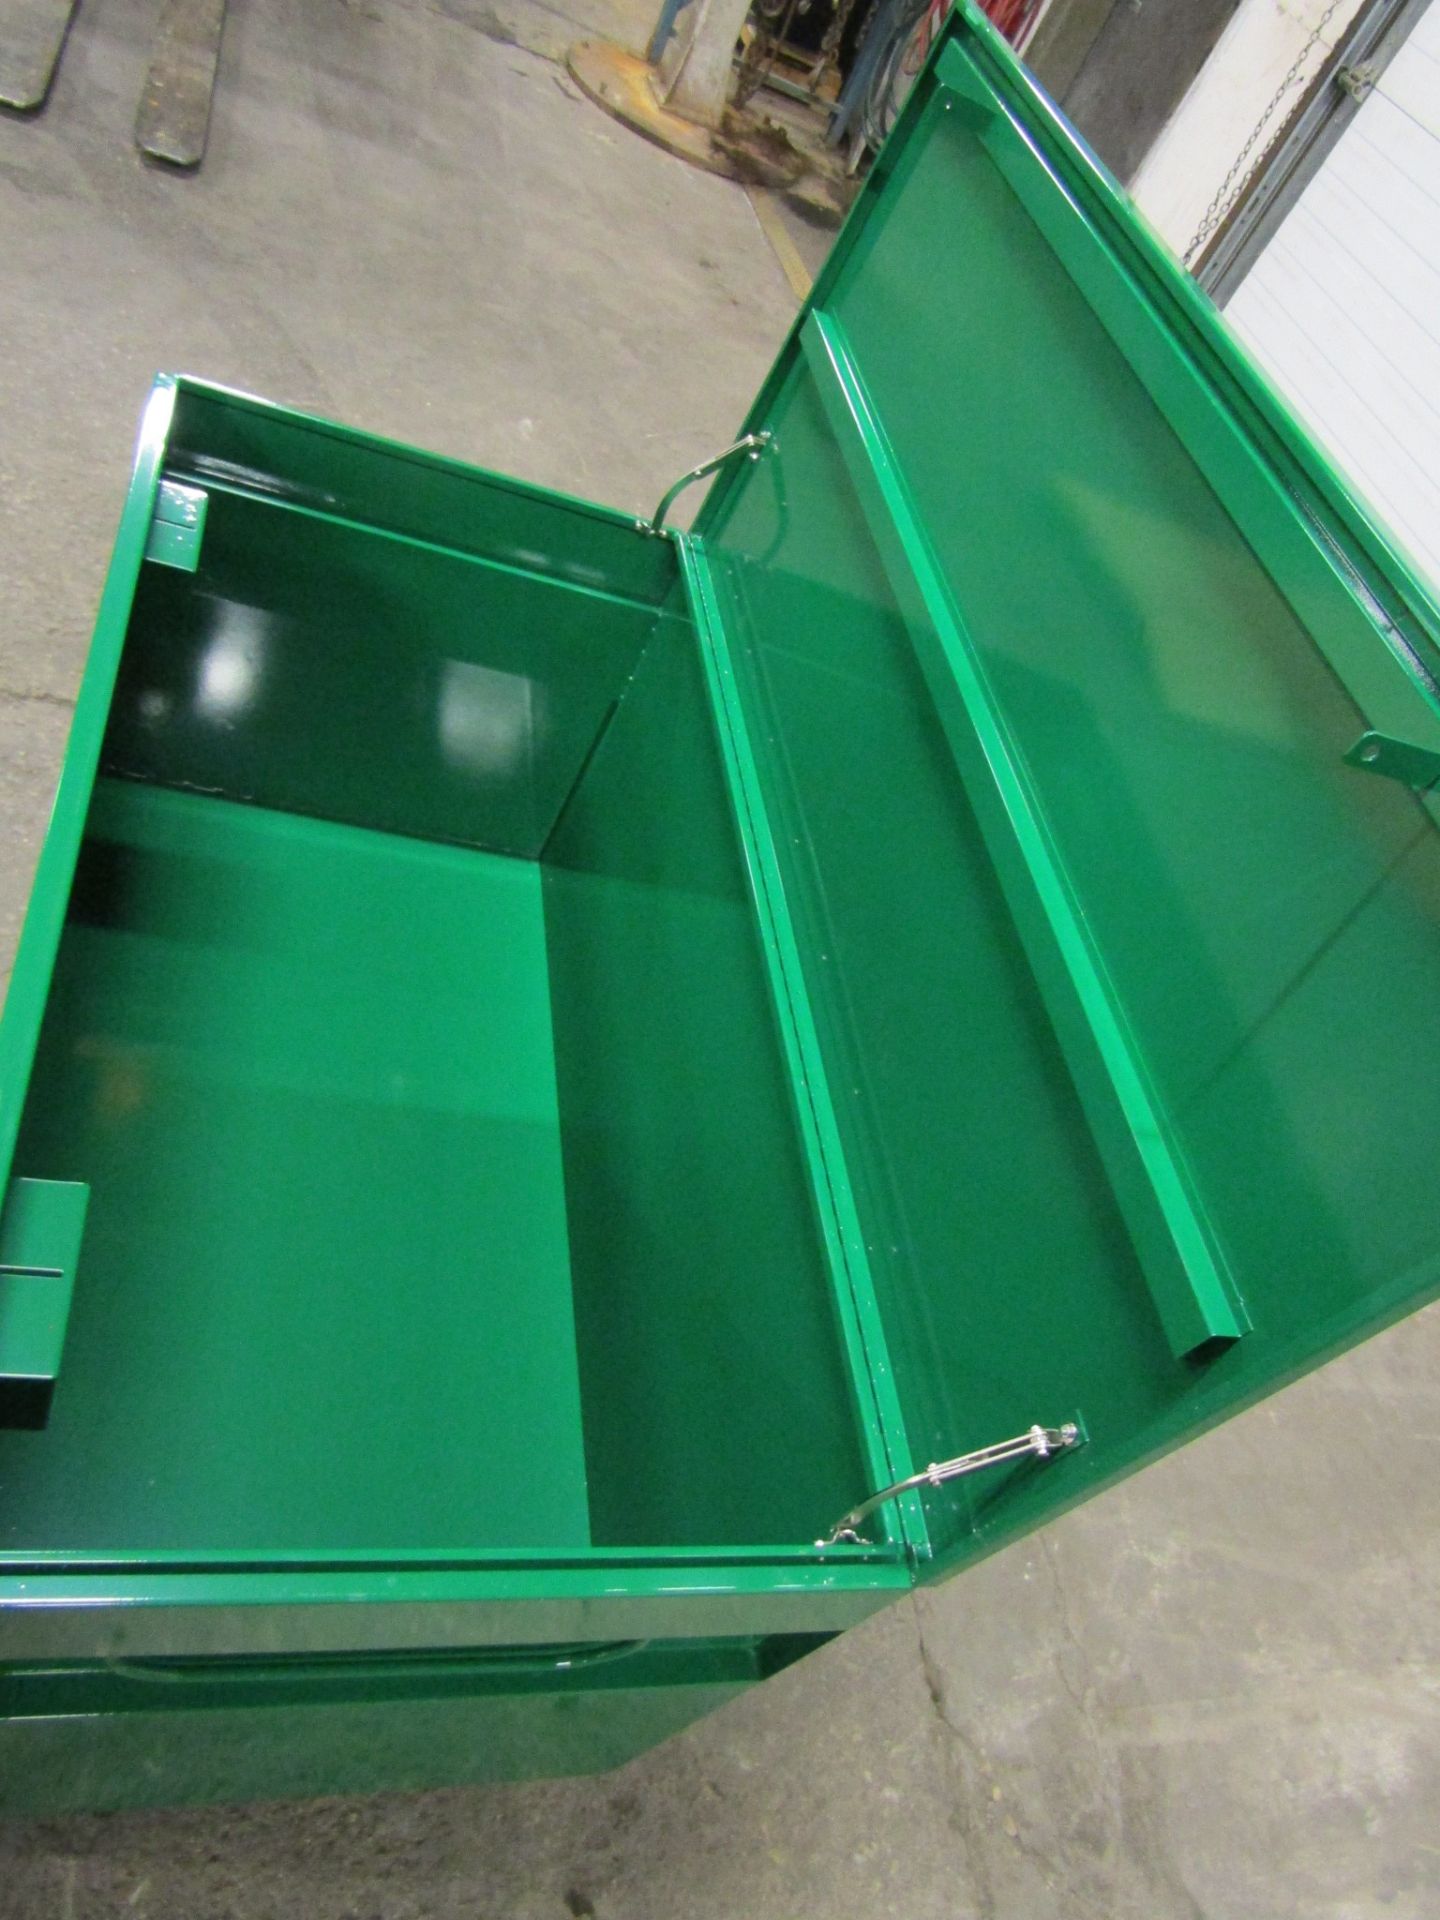 Fullers Worksite Jobbox / Toolbox - MINT new unit - Image 3 of 3